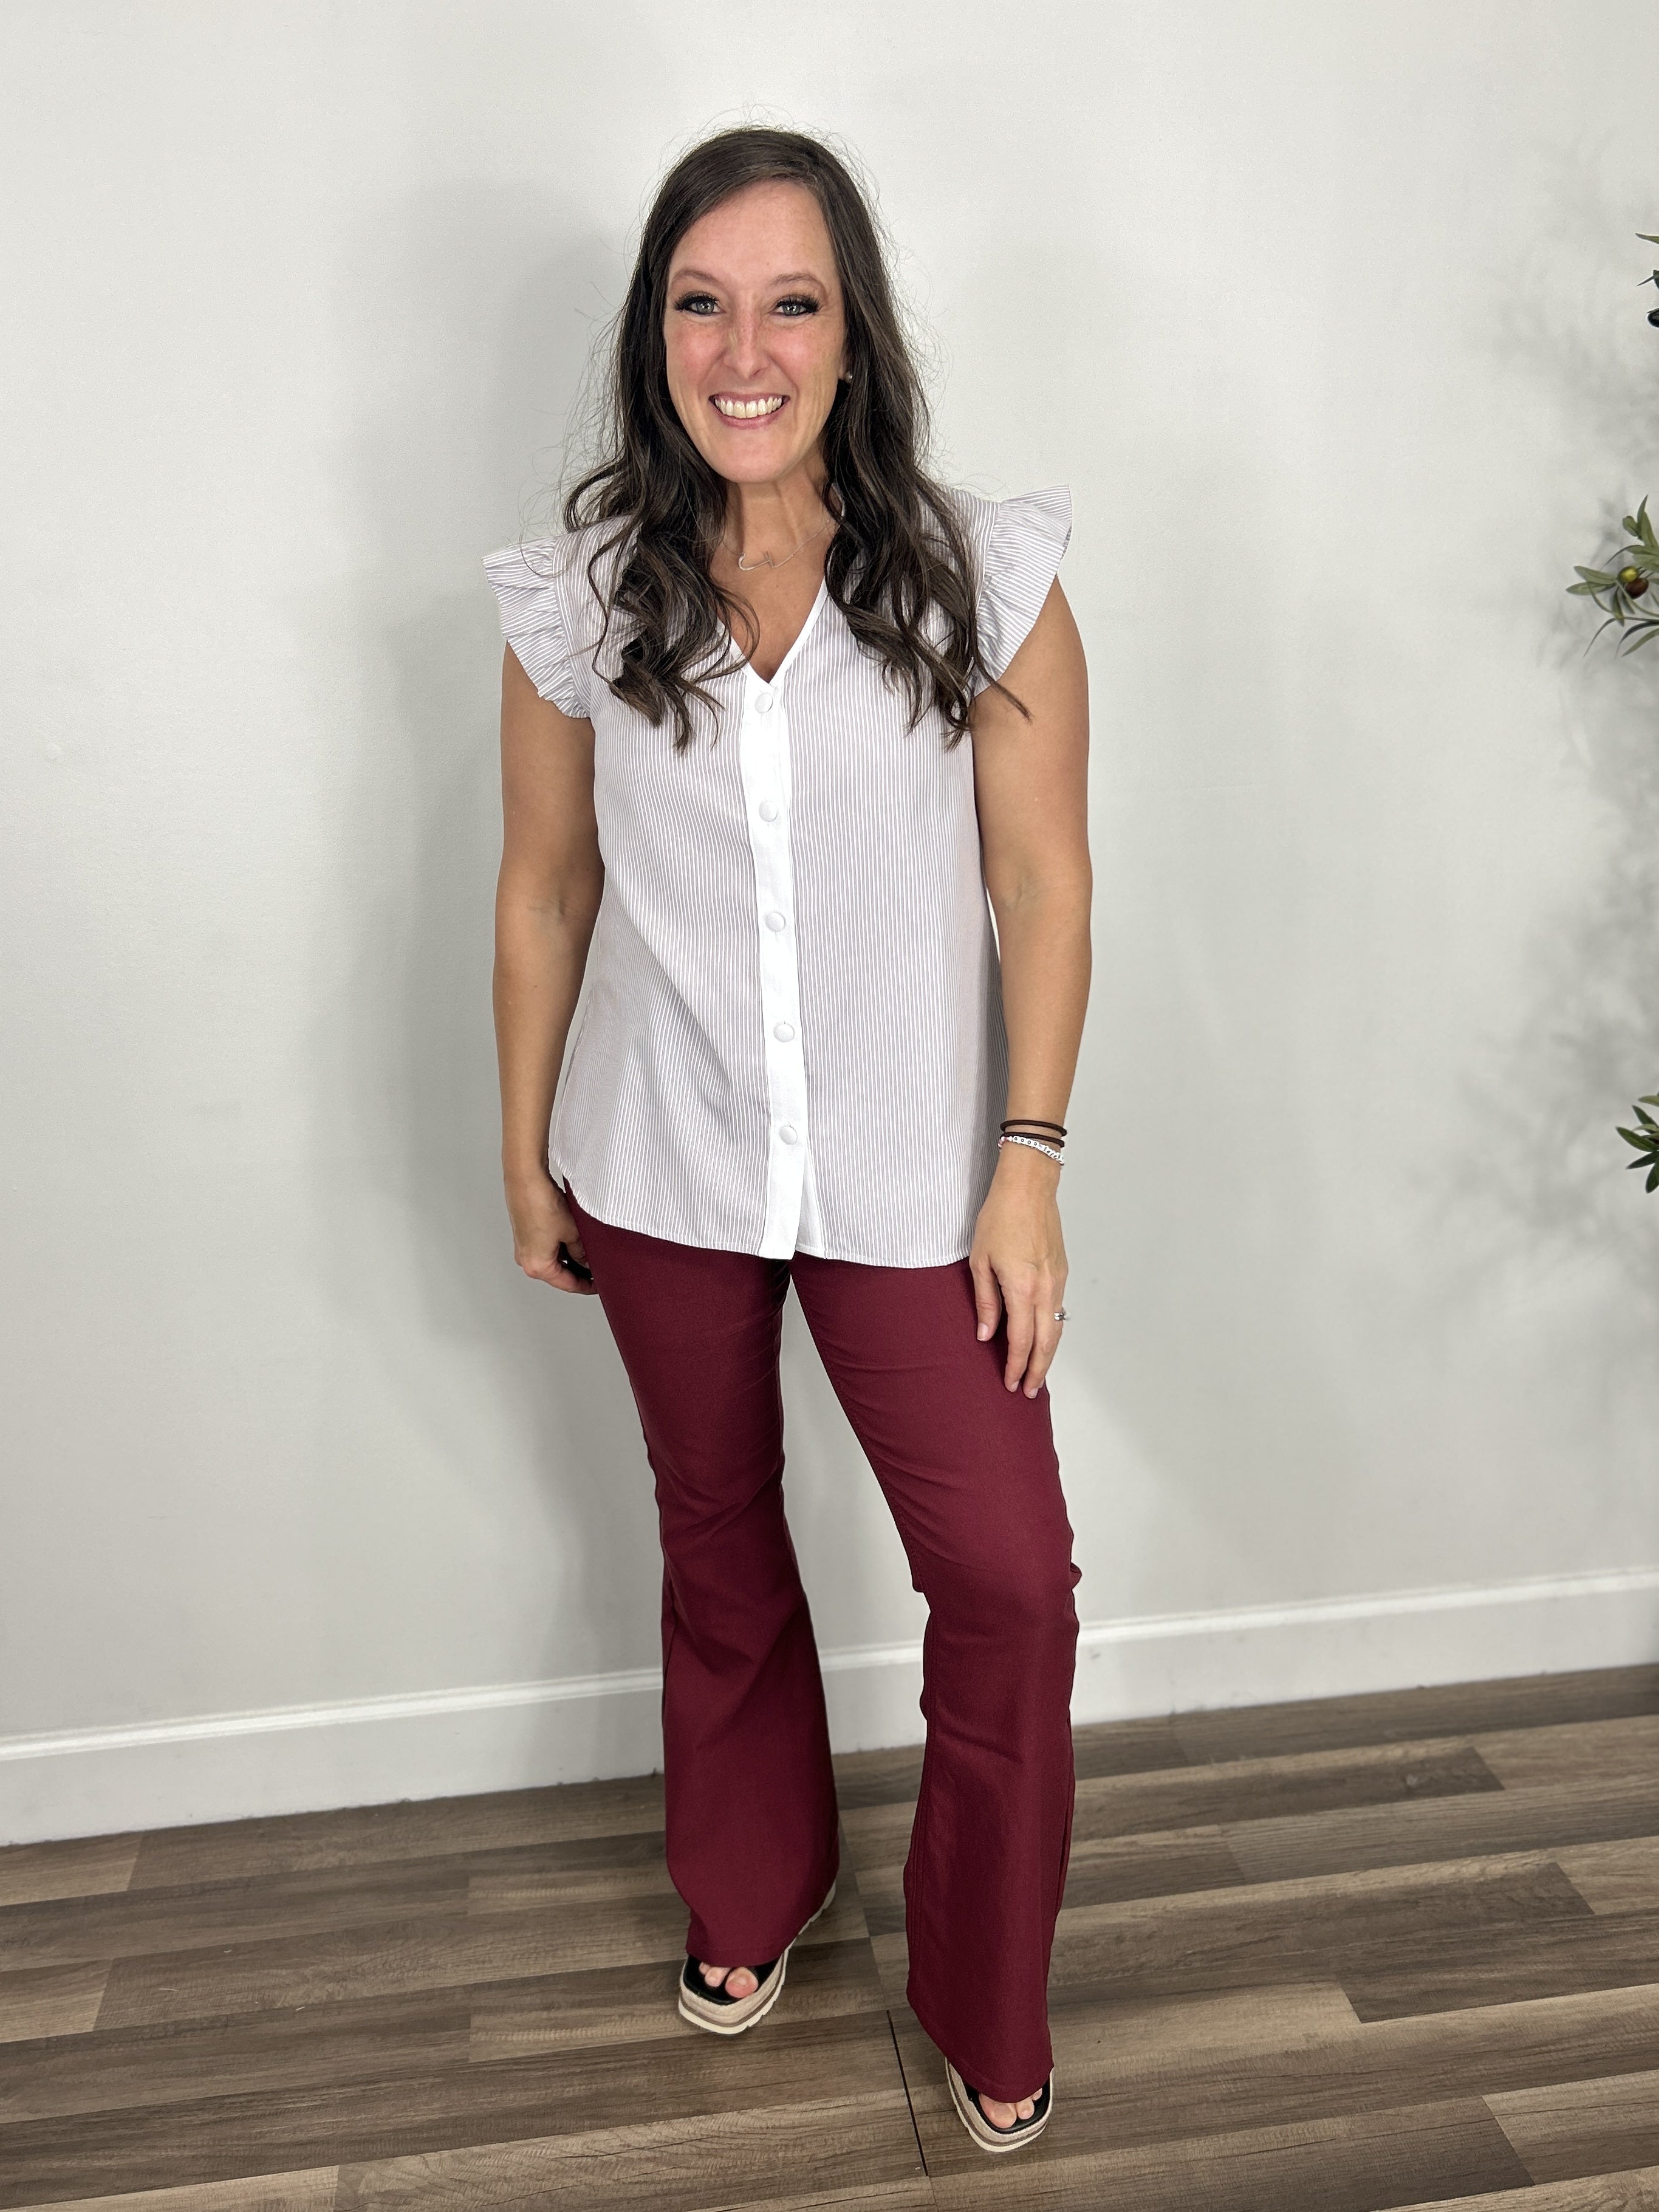 Women's grey and white pinstripe button up blouse with flutter sleeves paired with maroon flare pants and black wedge sandals.